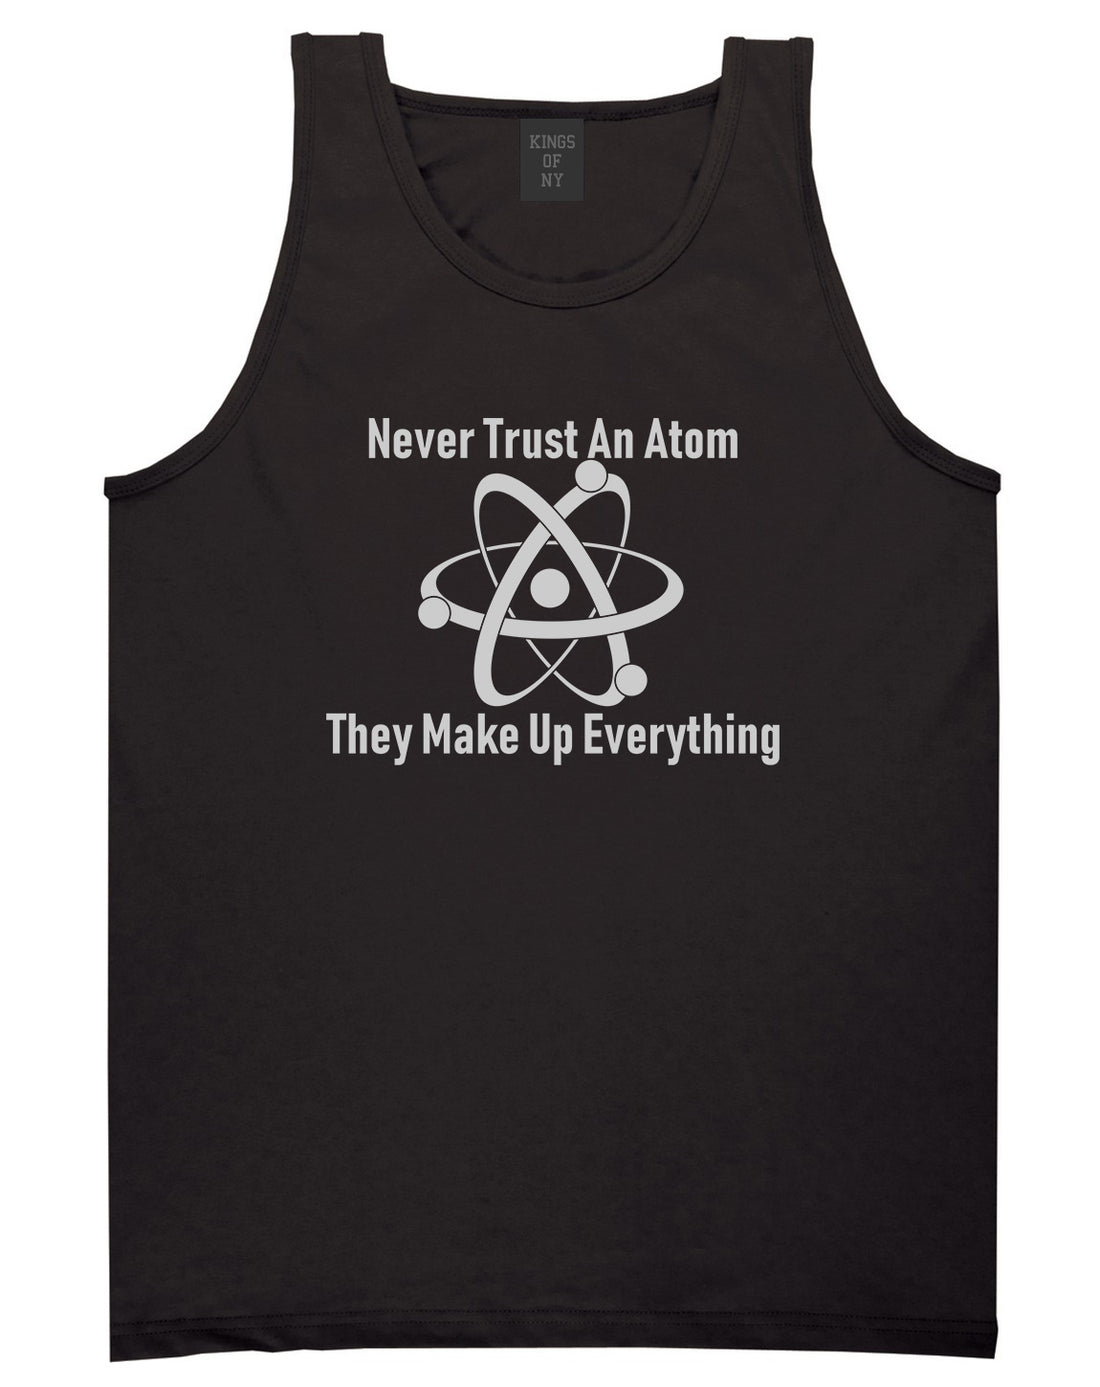 Never Trust An Atom They Make Up Everything Funny Mens Tank Top T-Shirt Black